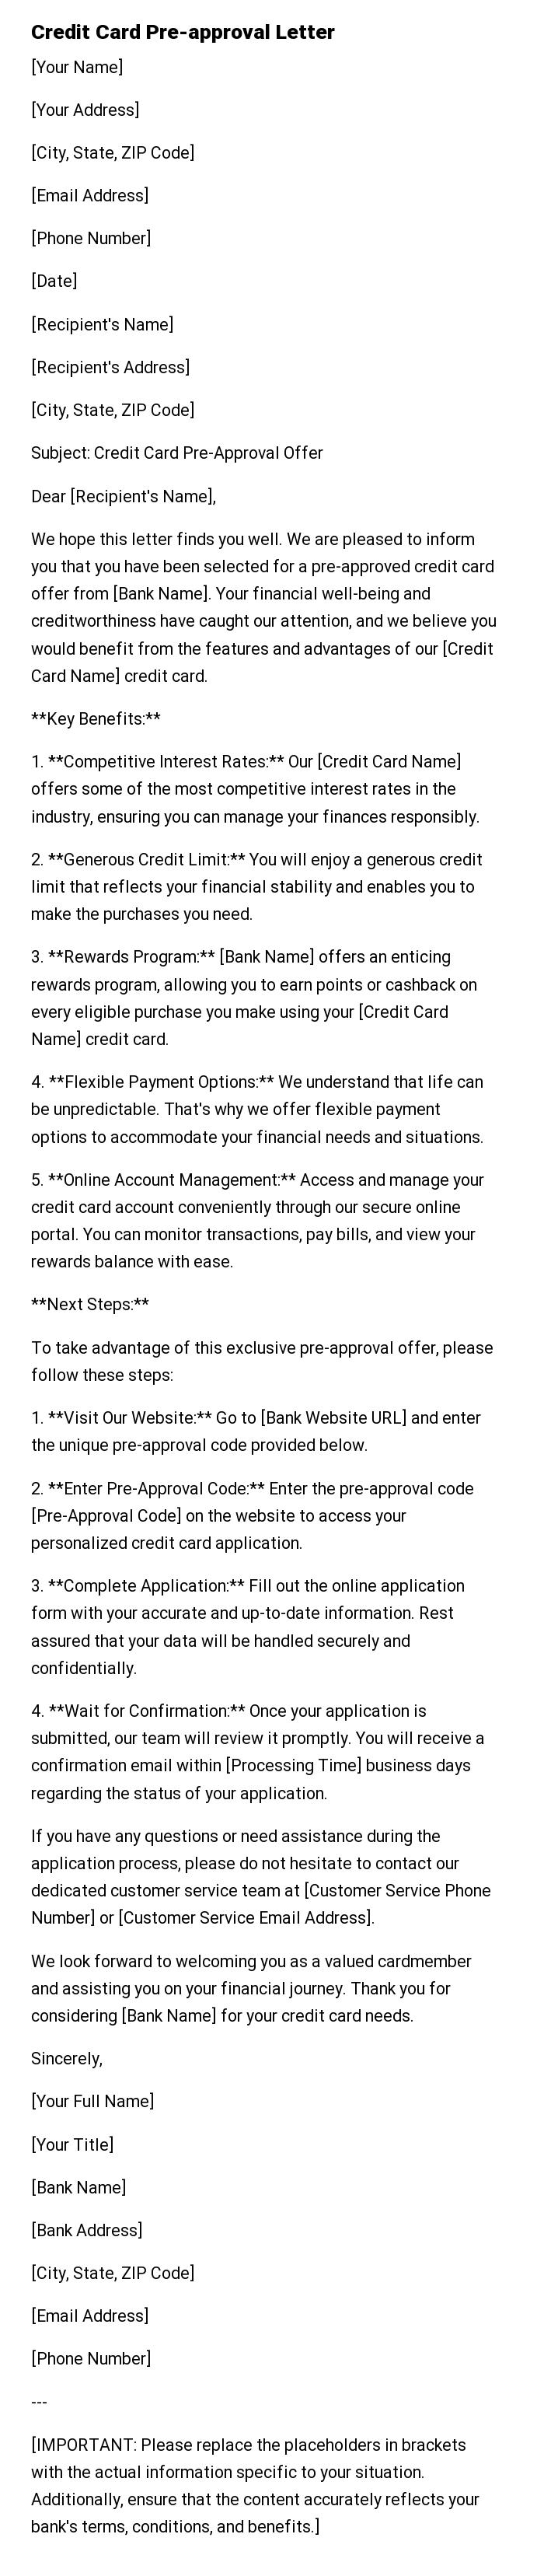 Credit Card Pre-approval Letter